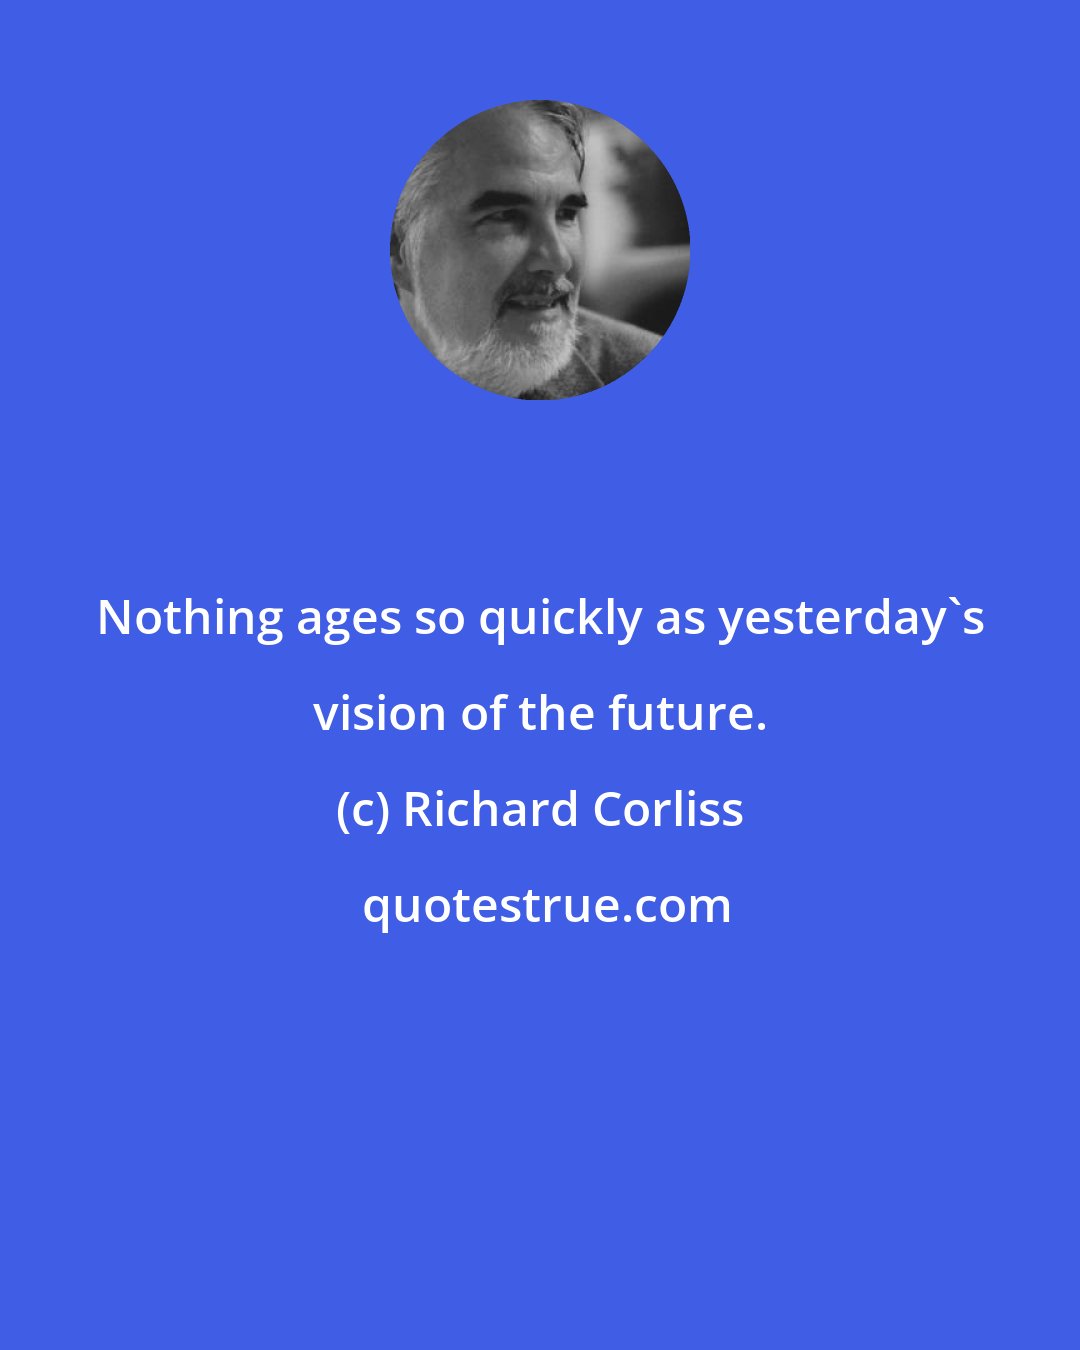 Richard Corliss: Nothing ages so quickly as yesterday's vision of the future.